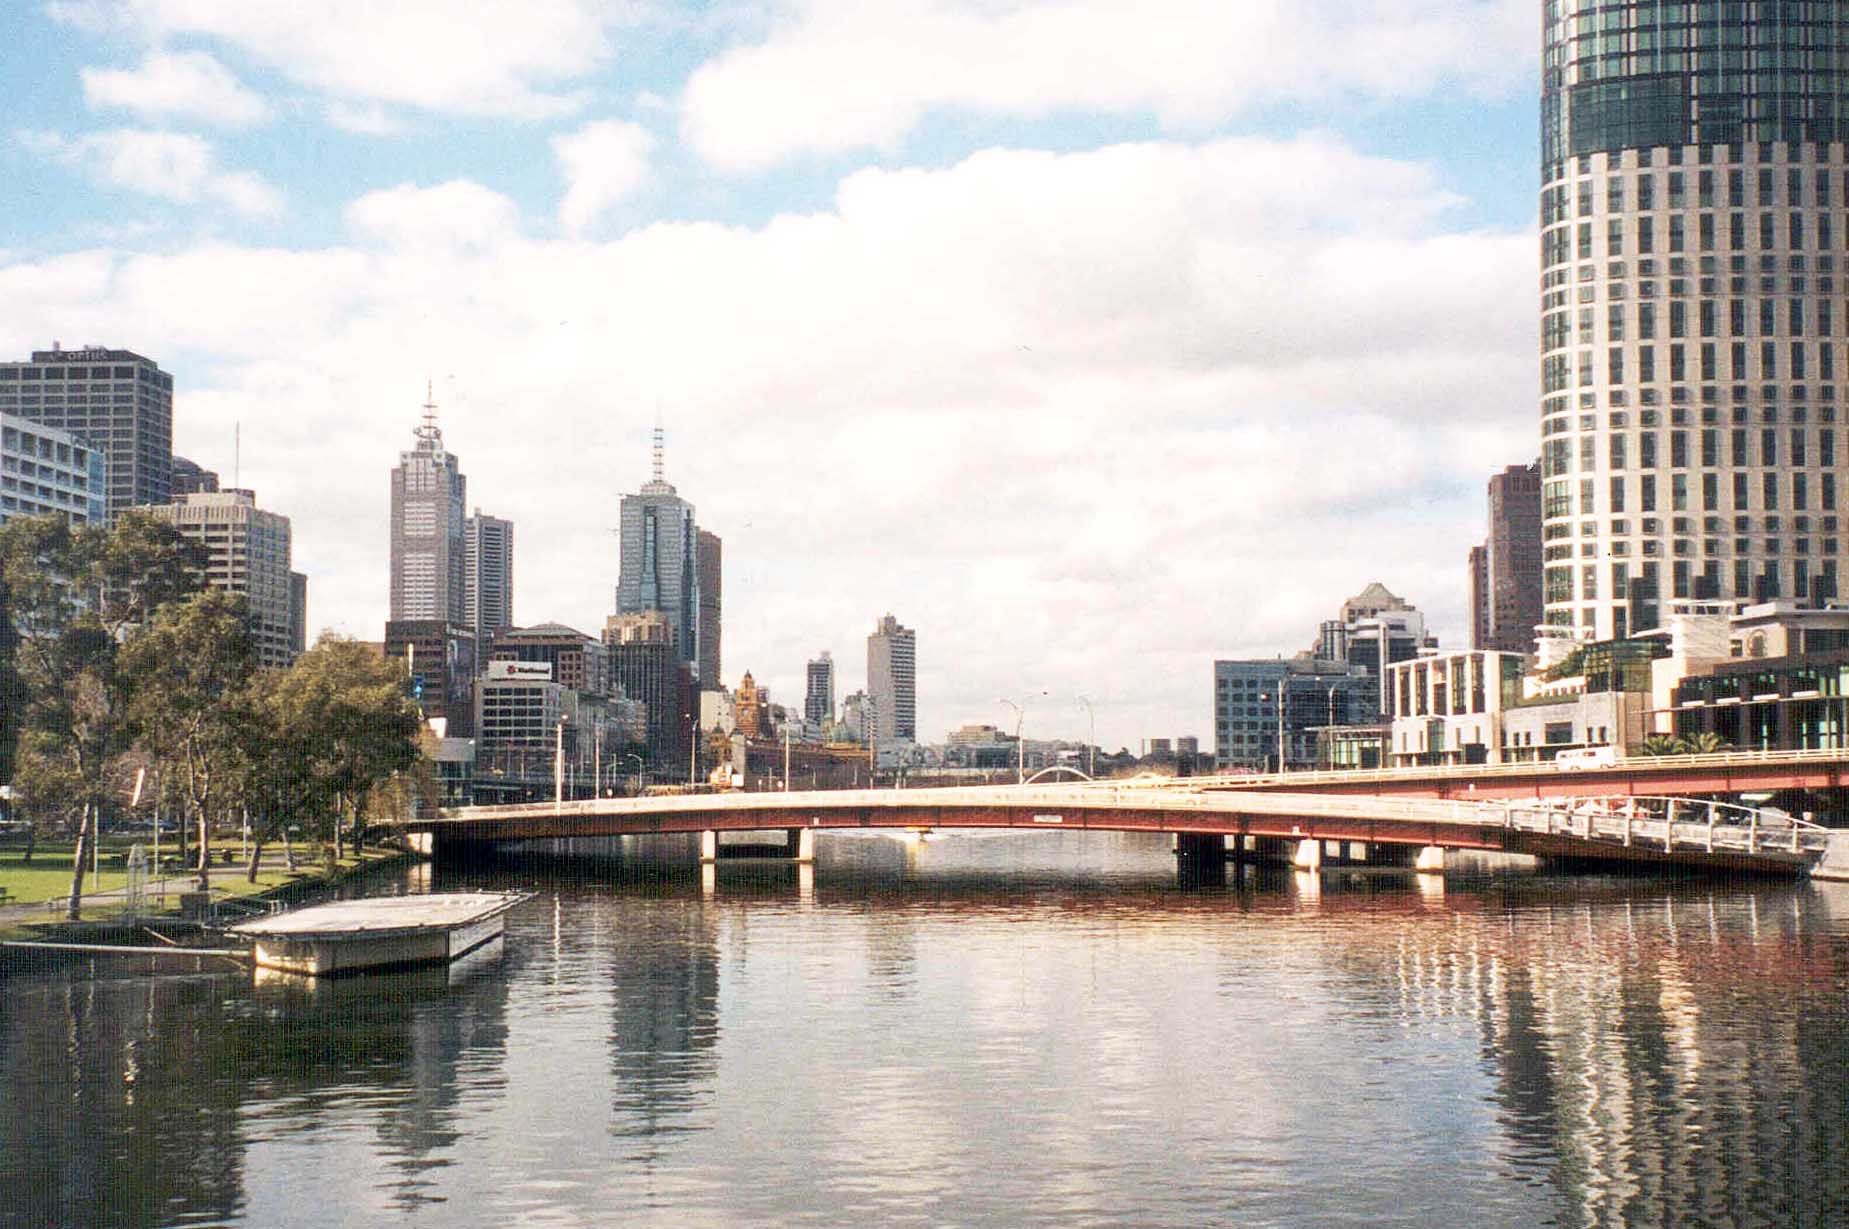 View of the Yarra River and city in Melbourne, Australia.